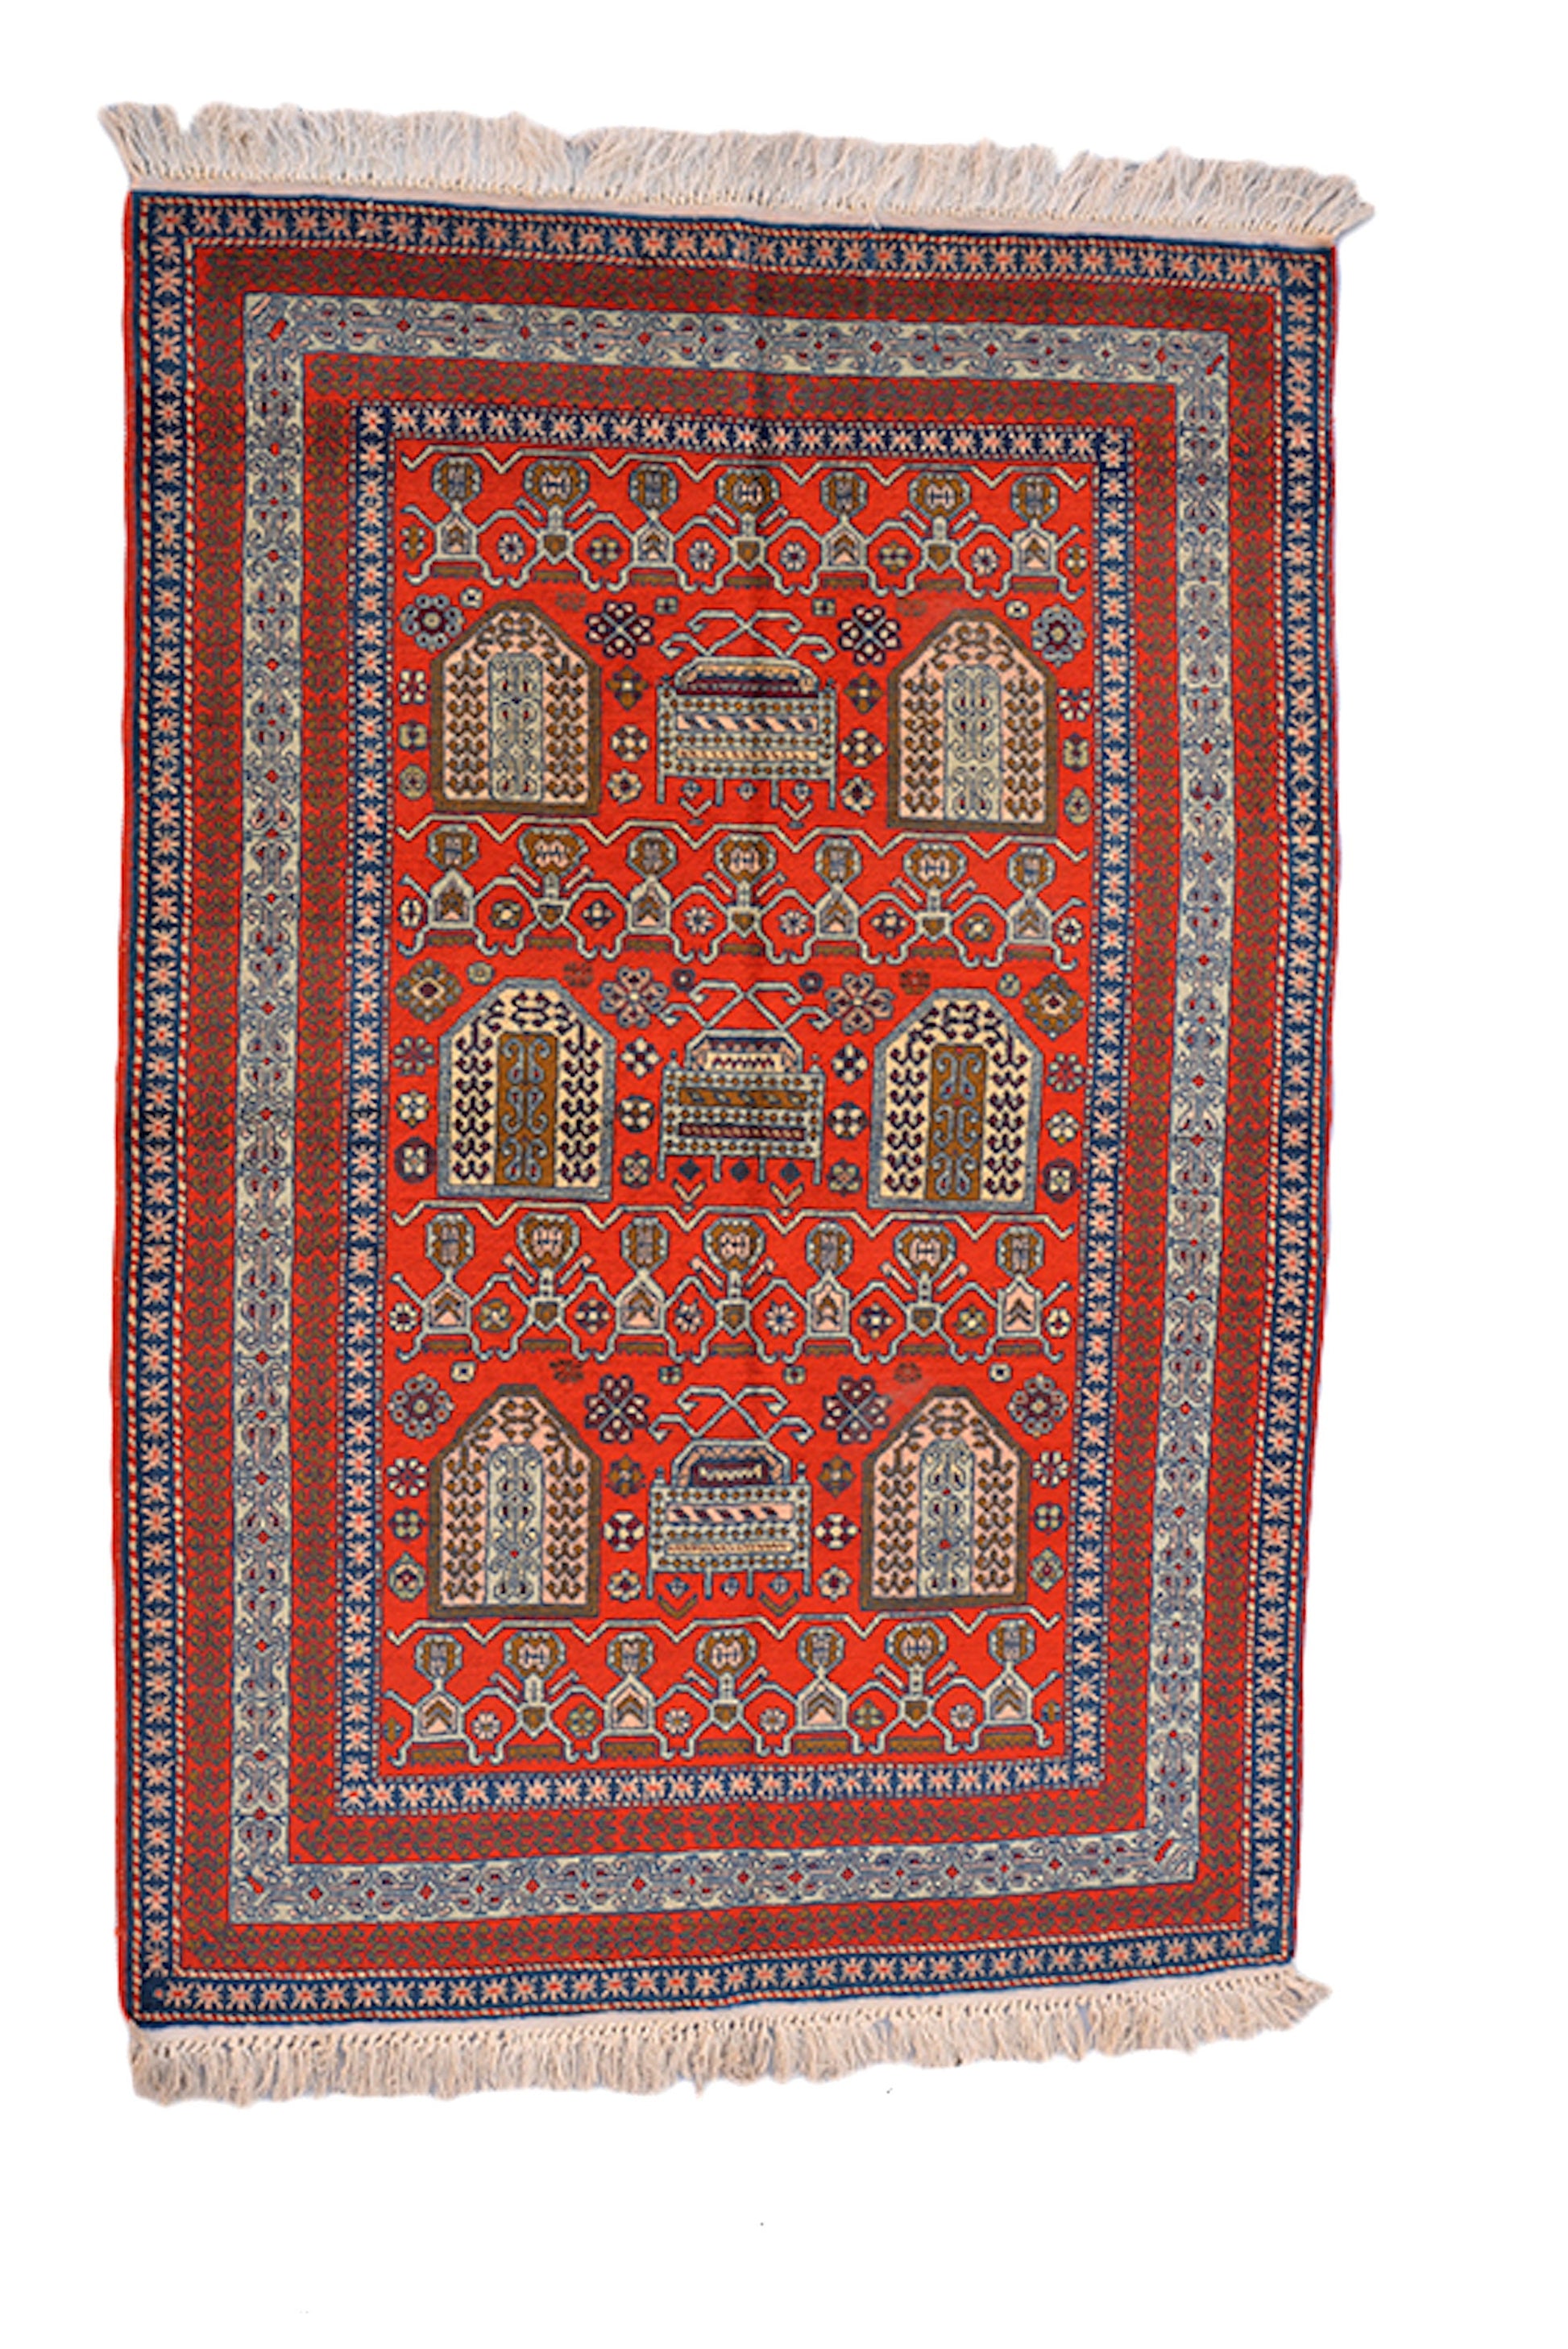 3 x 5 Feet Bright Color Turkish Caucasian Rug | Hand Woven Area Rug | Oriental Persian Rug | Living Room Rug | Accent Geometric Pattern Rug